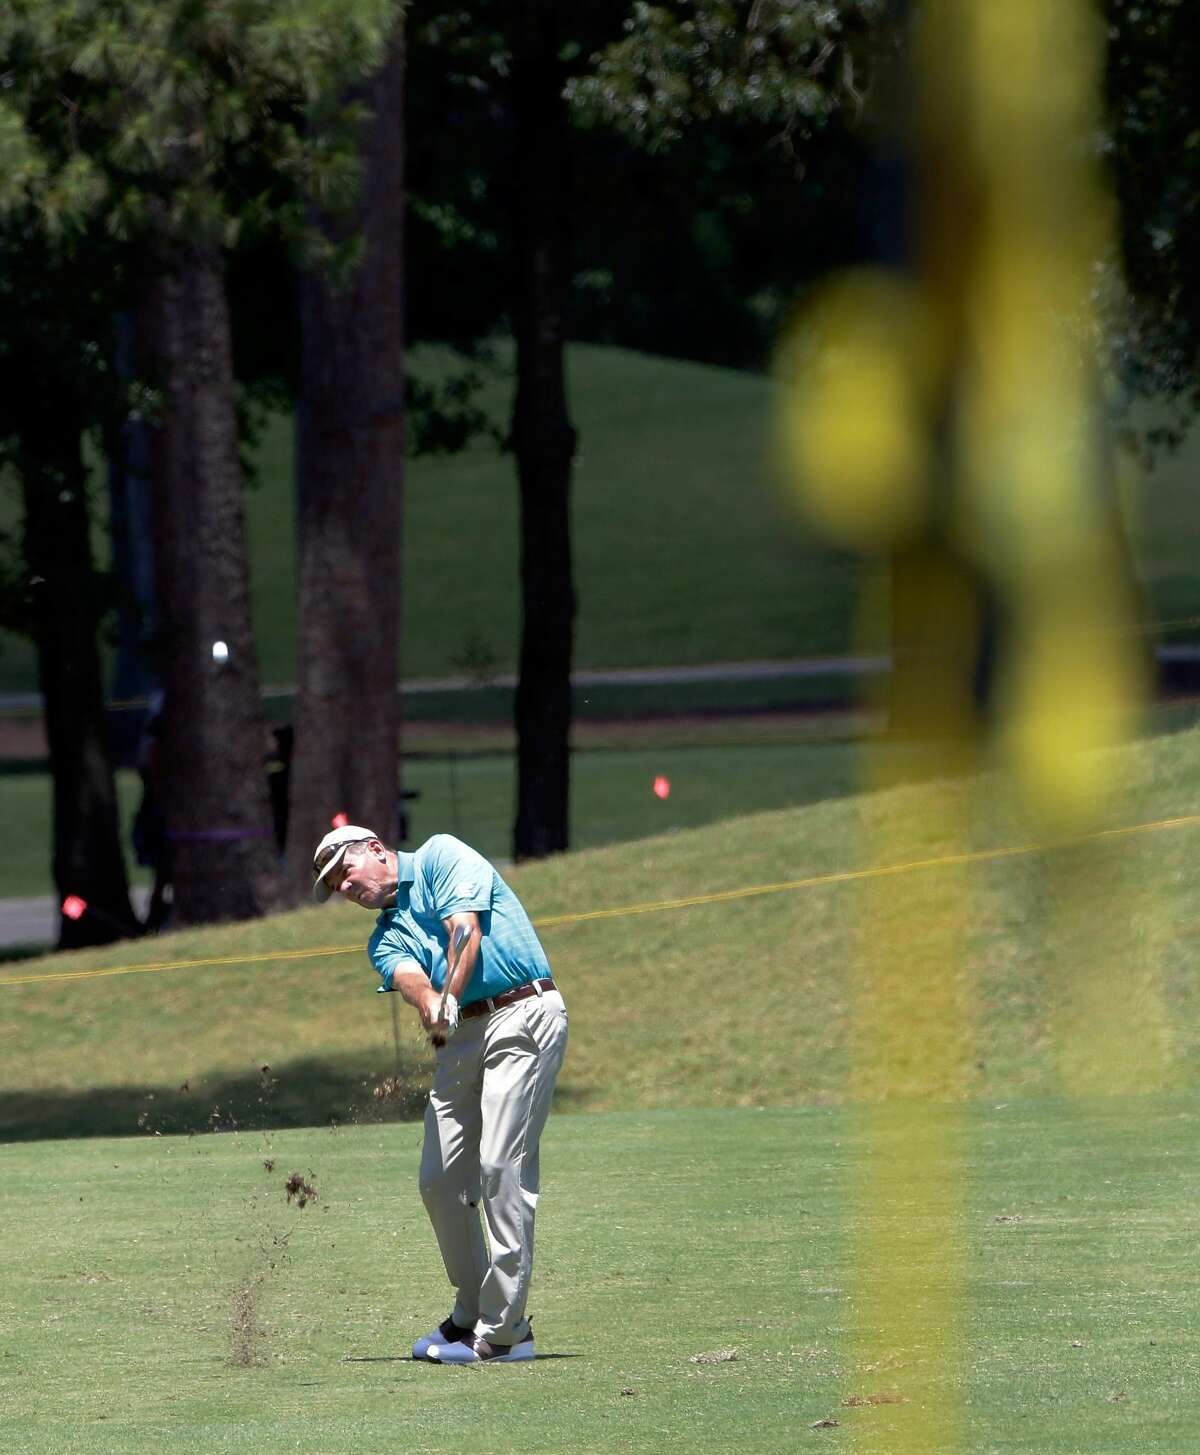 Scott Dunlap hits on the 6th hole fairway during the third round of the Insperity Invitational at the The Woodlands Country Club Sunday, May 6, 2018, in The Woodlands, TX. (Michael Wyke / For the Chronicle)